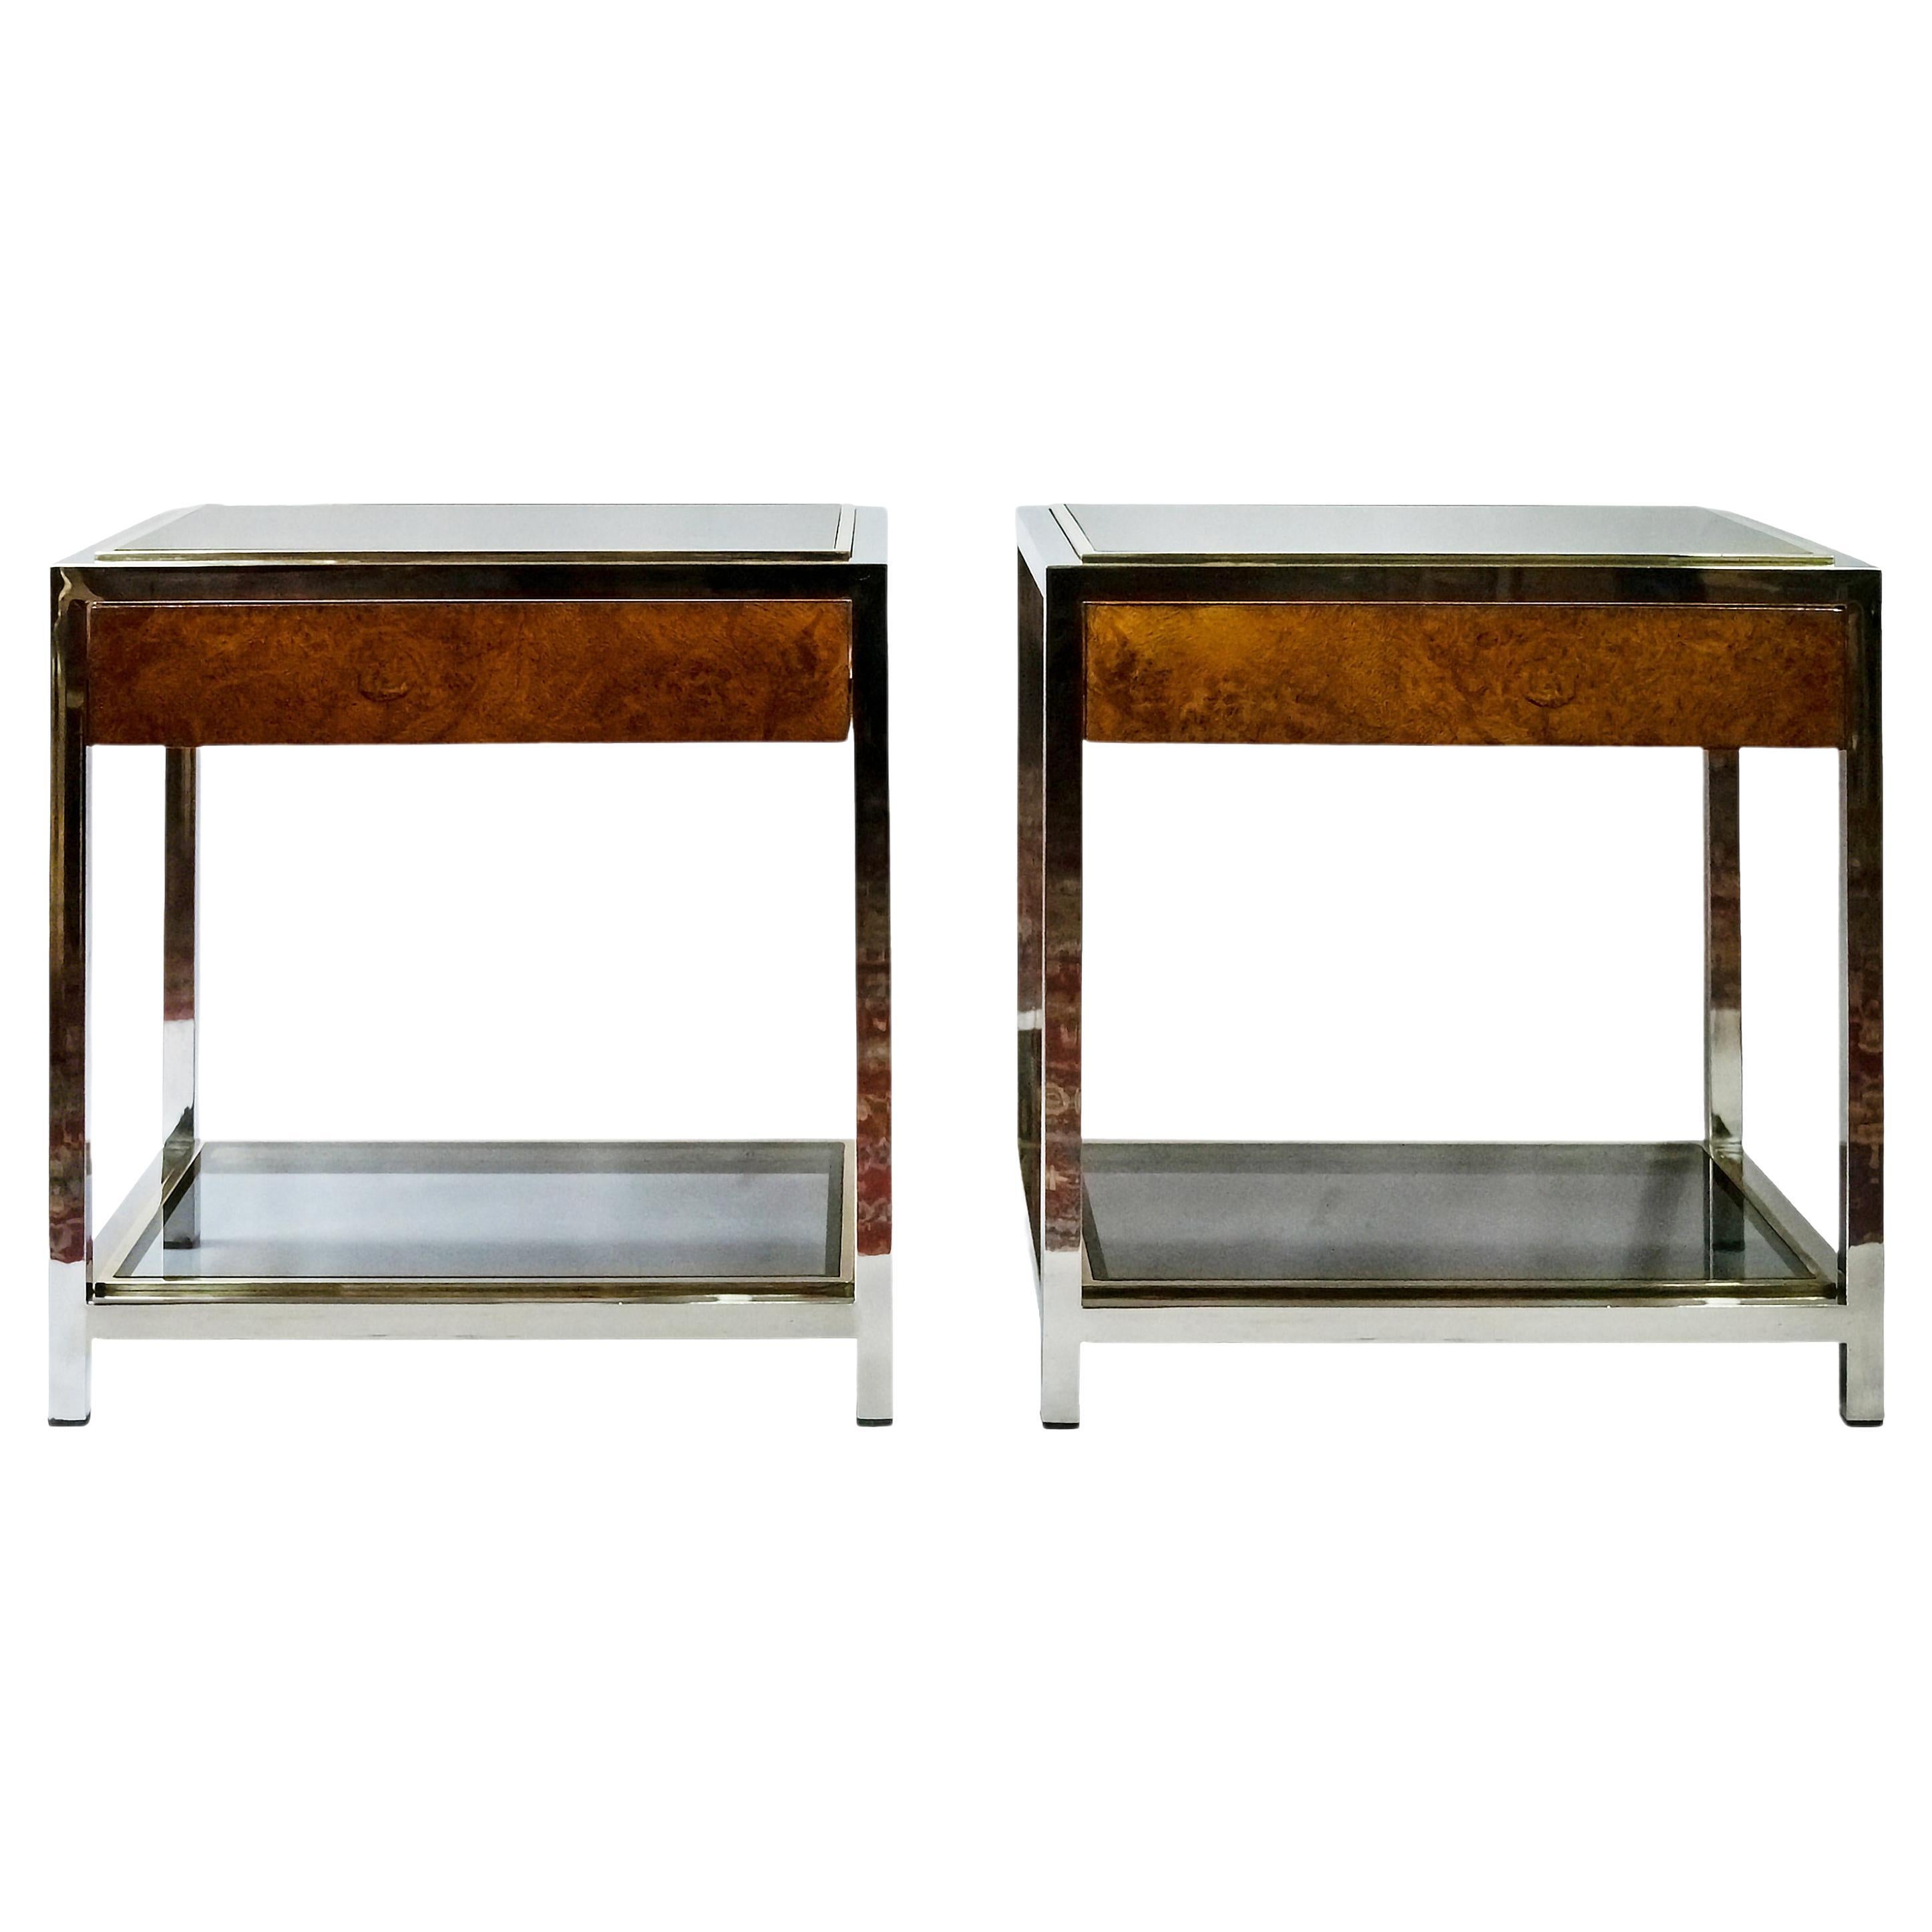 Pair of Italian bedside night stands/tables from 1970s in Romeo Rega, Willy Rizzo style.
The construction is in chrome and brass with glass top and glass shelve.
Each table includes one wood and veneer drawer.
Very good vintage condition.